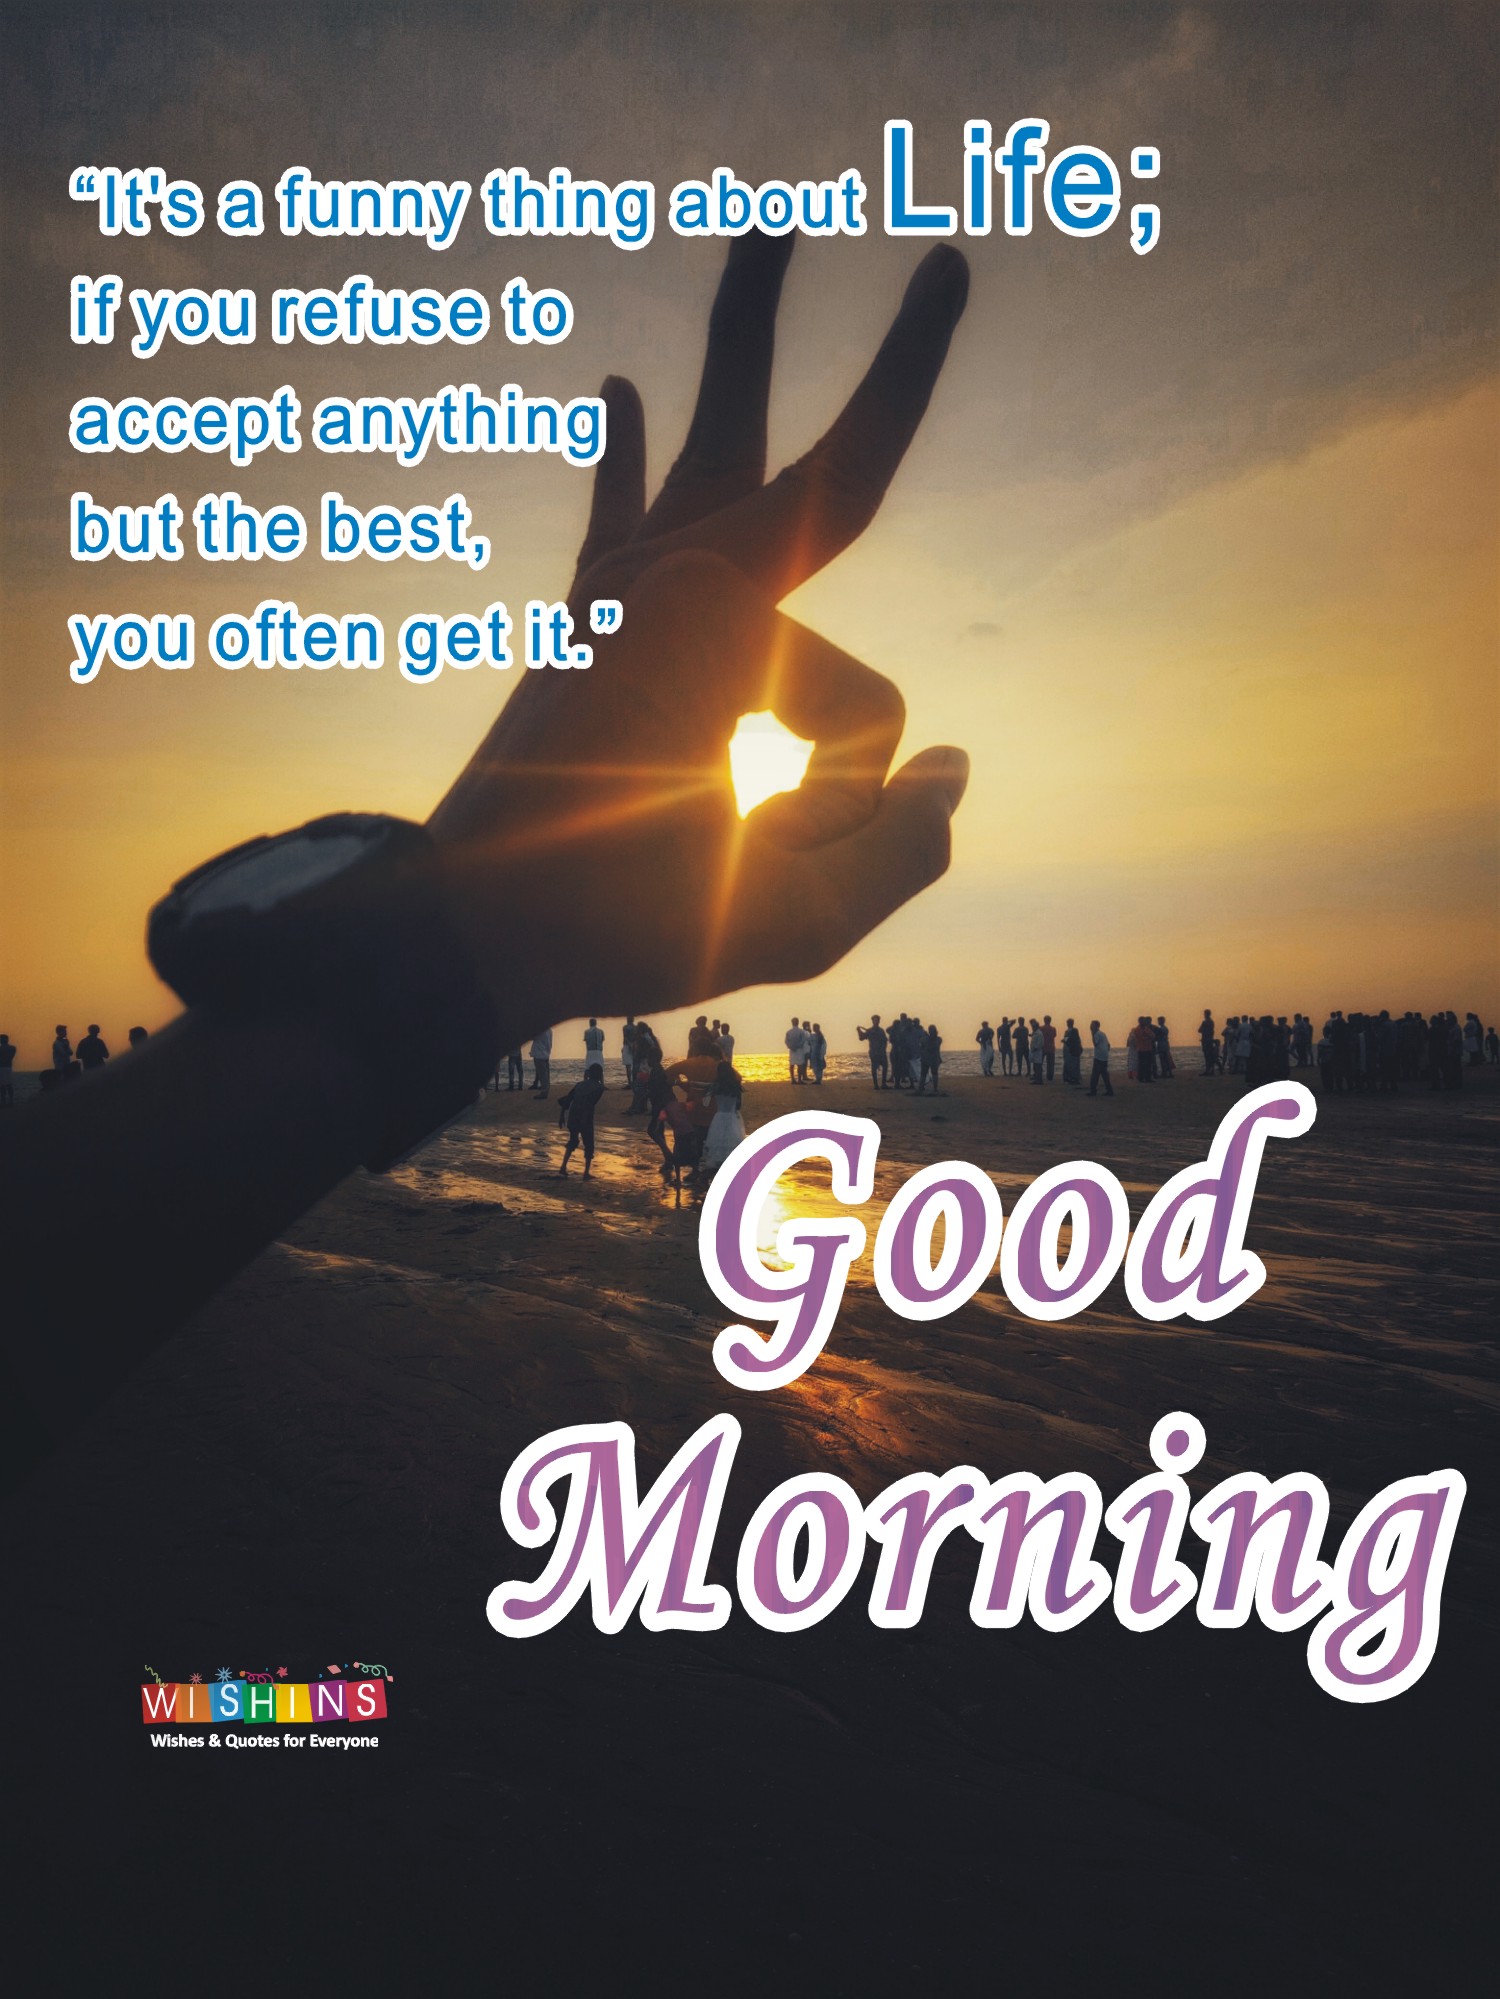 10 Best Good Morning Quotes For Life With Beautiful Images 2019